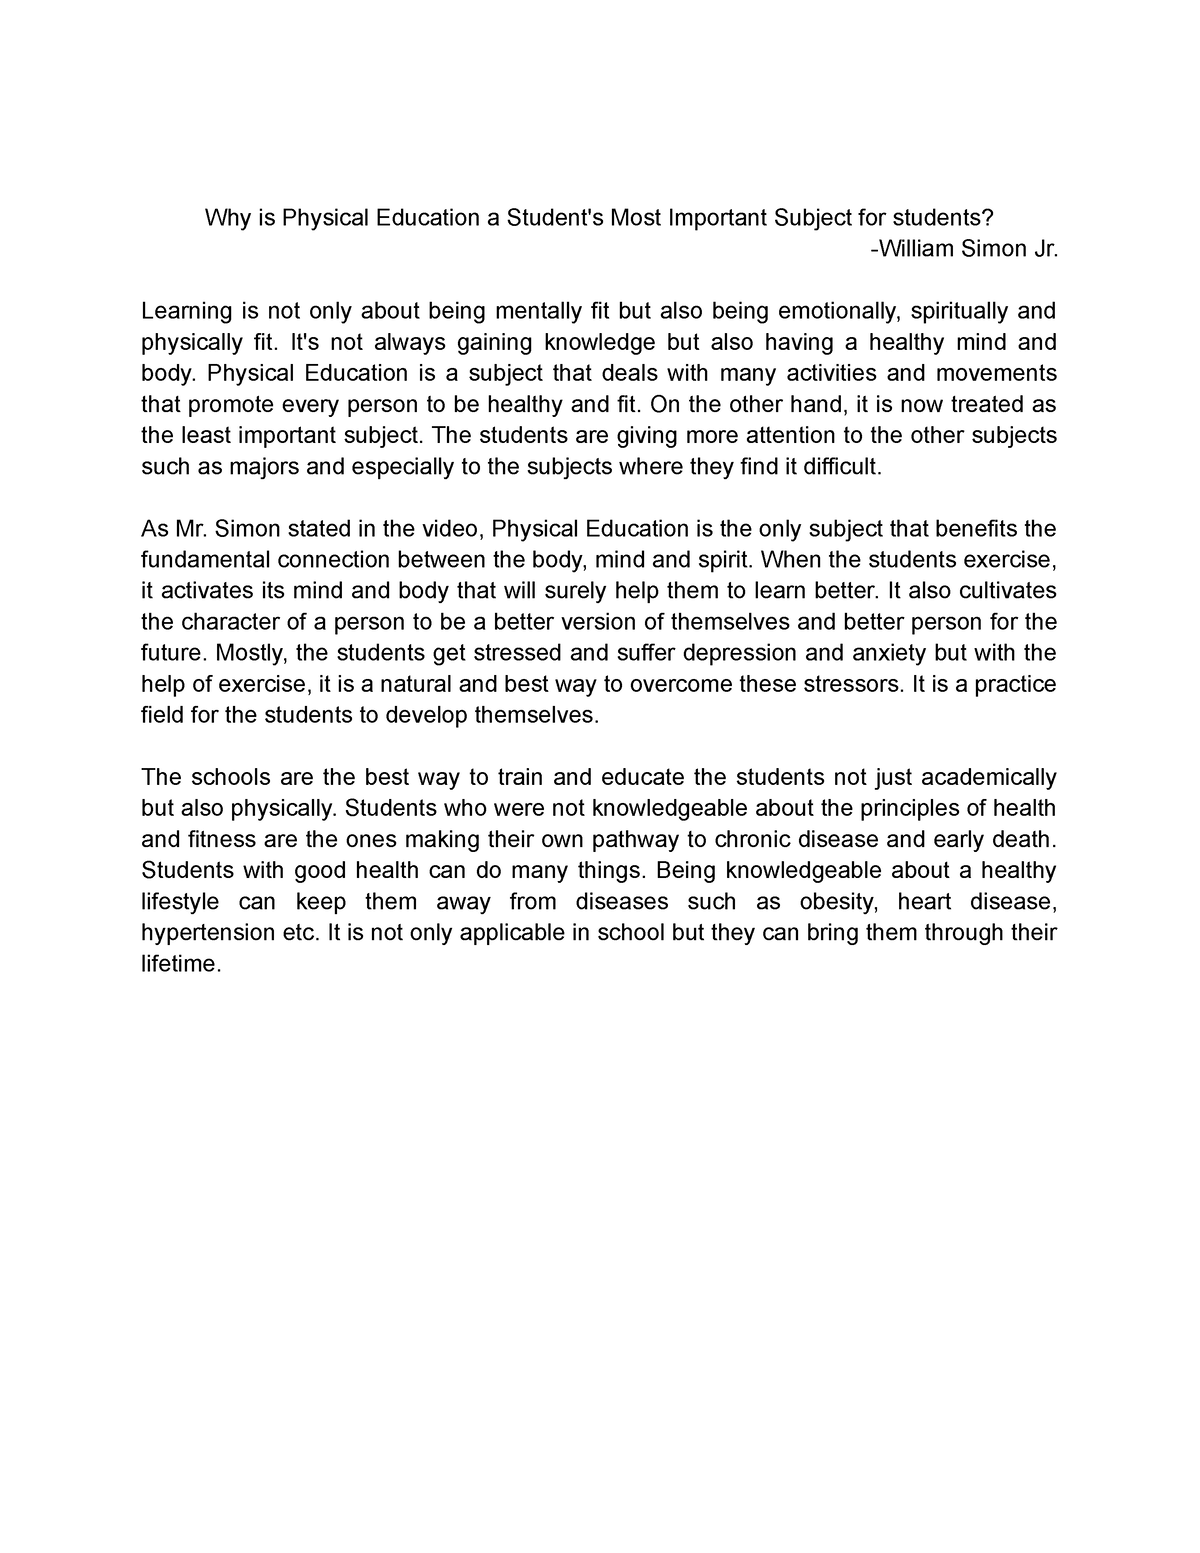 why is physical education a students most important subject essay